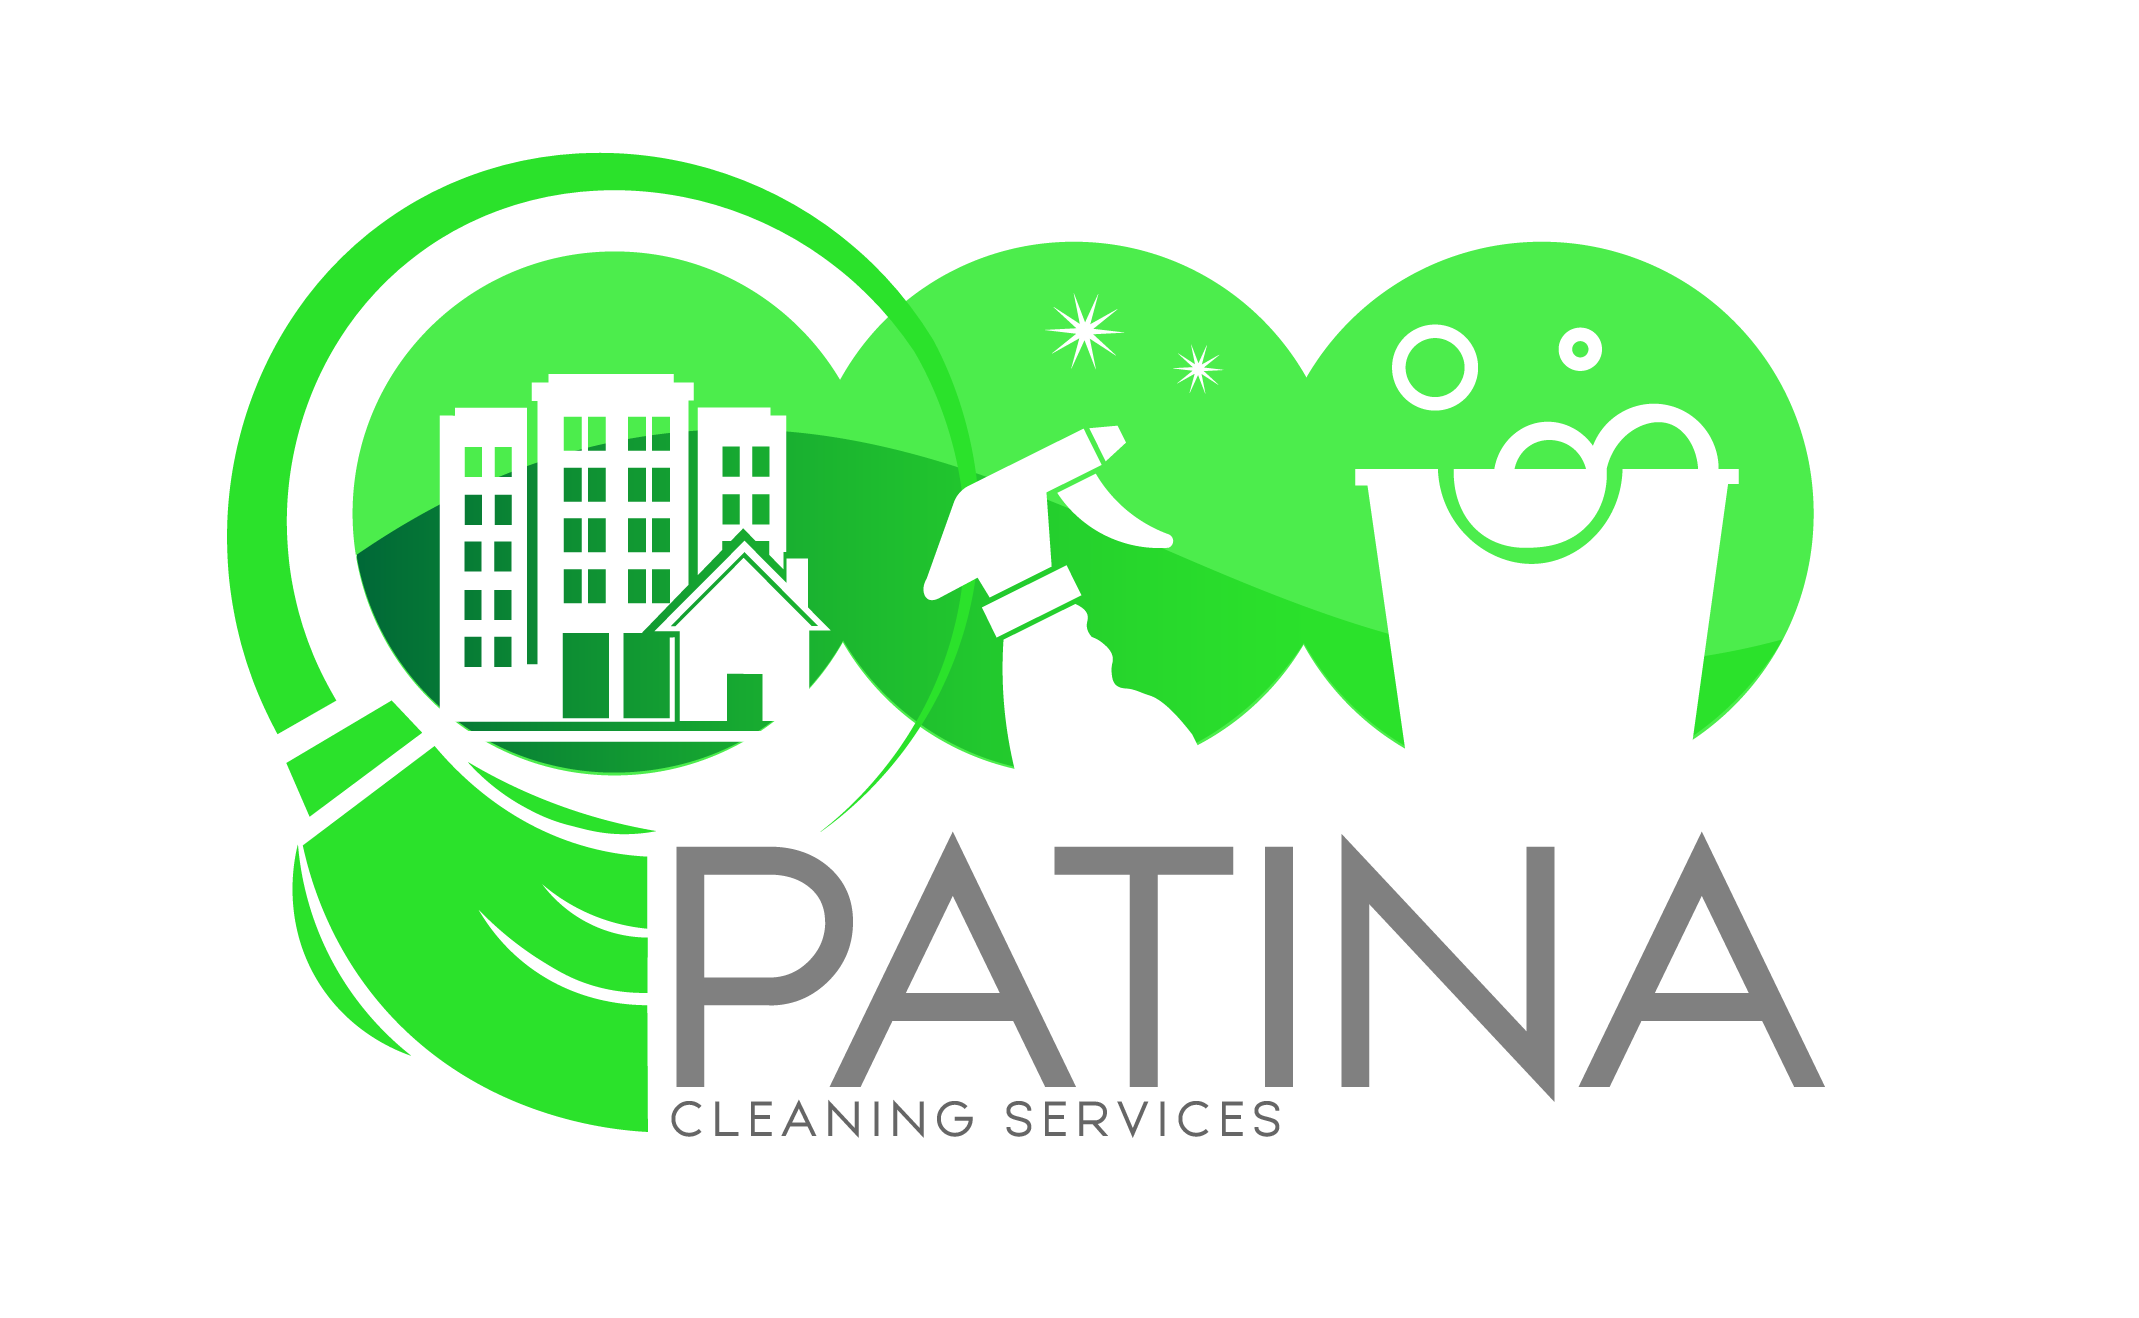 Patina Cleaning Services Ltd